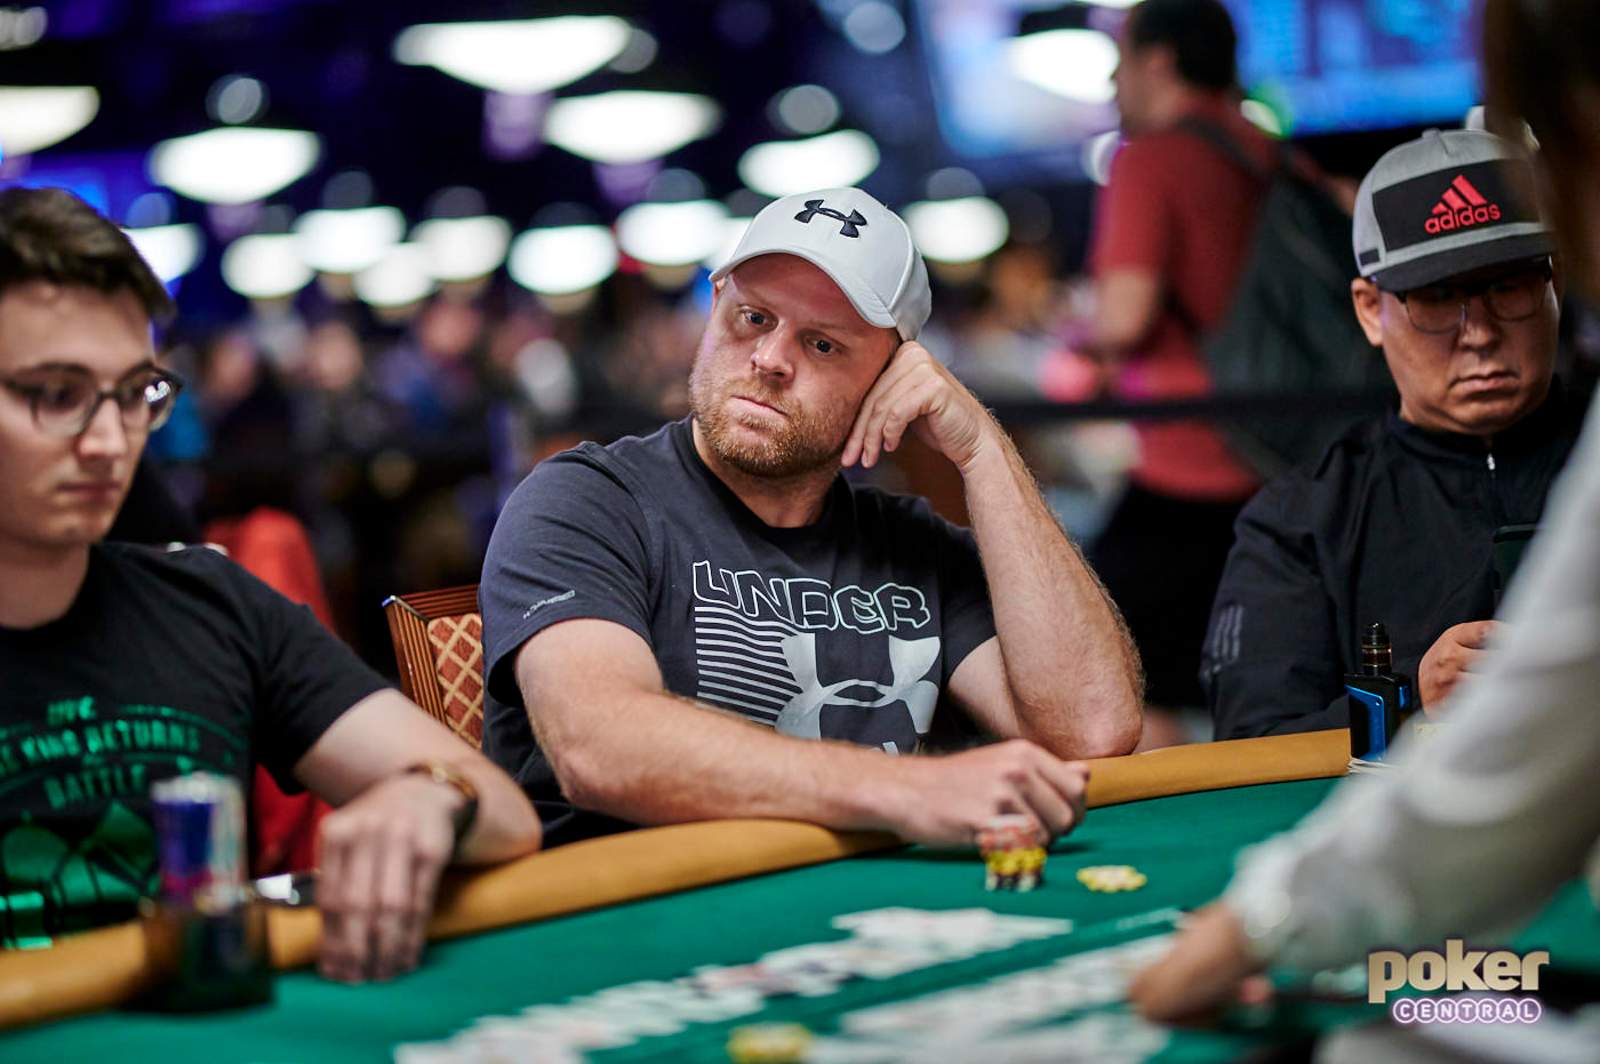 NHL Star Phil Kessel: “Competing is in my blood and that’s why I love poker.”